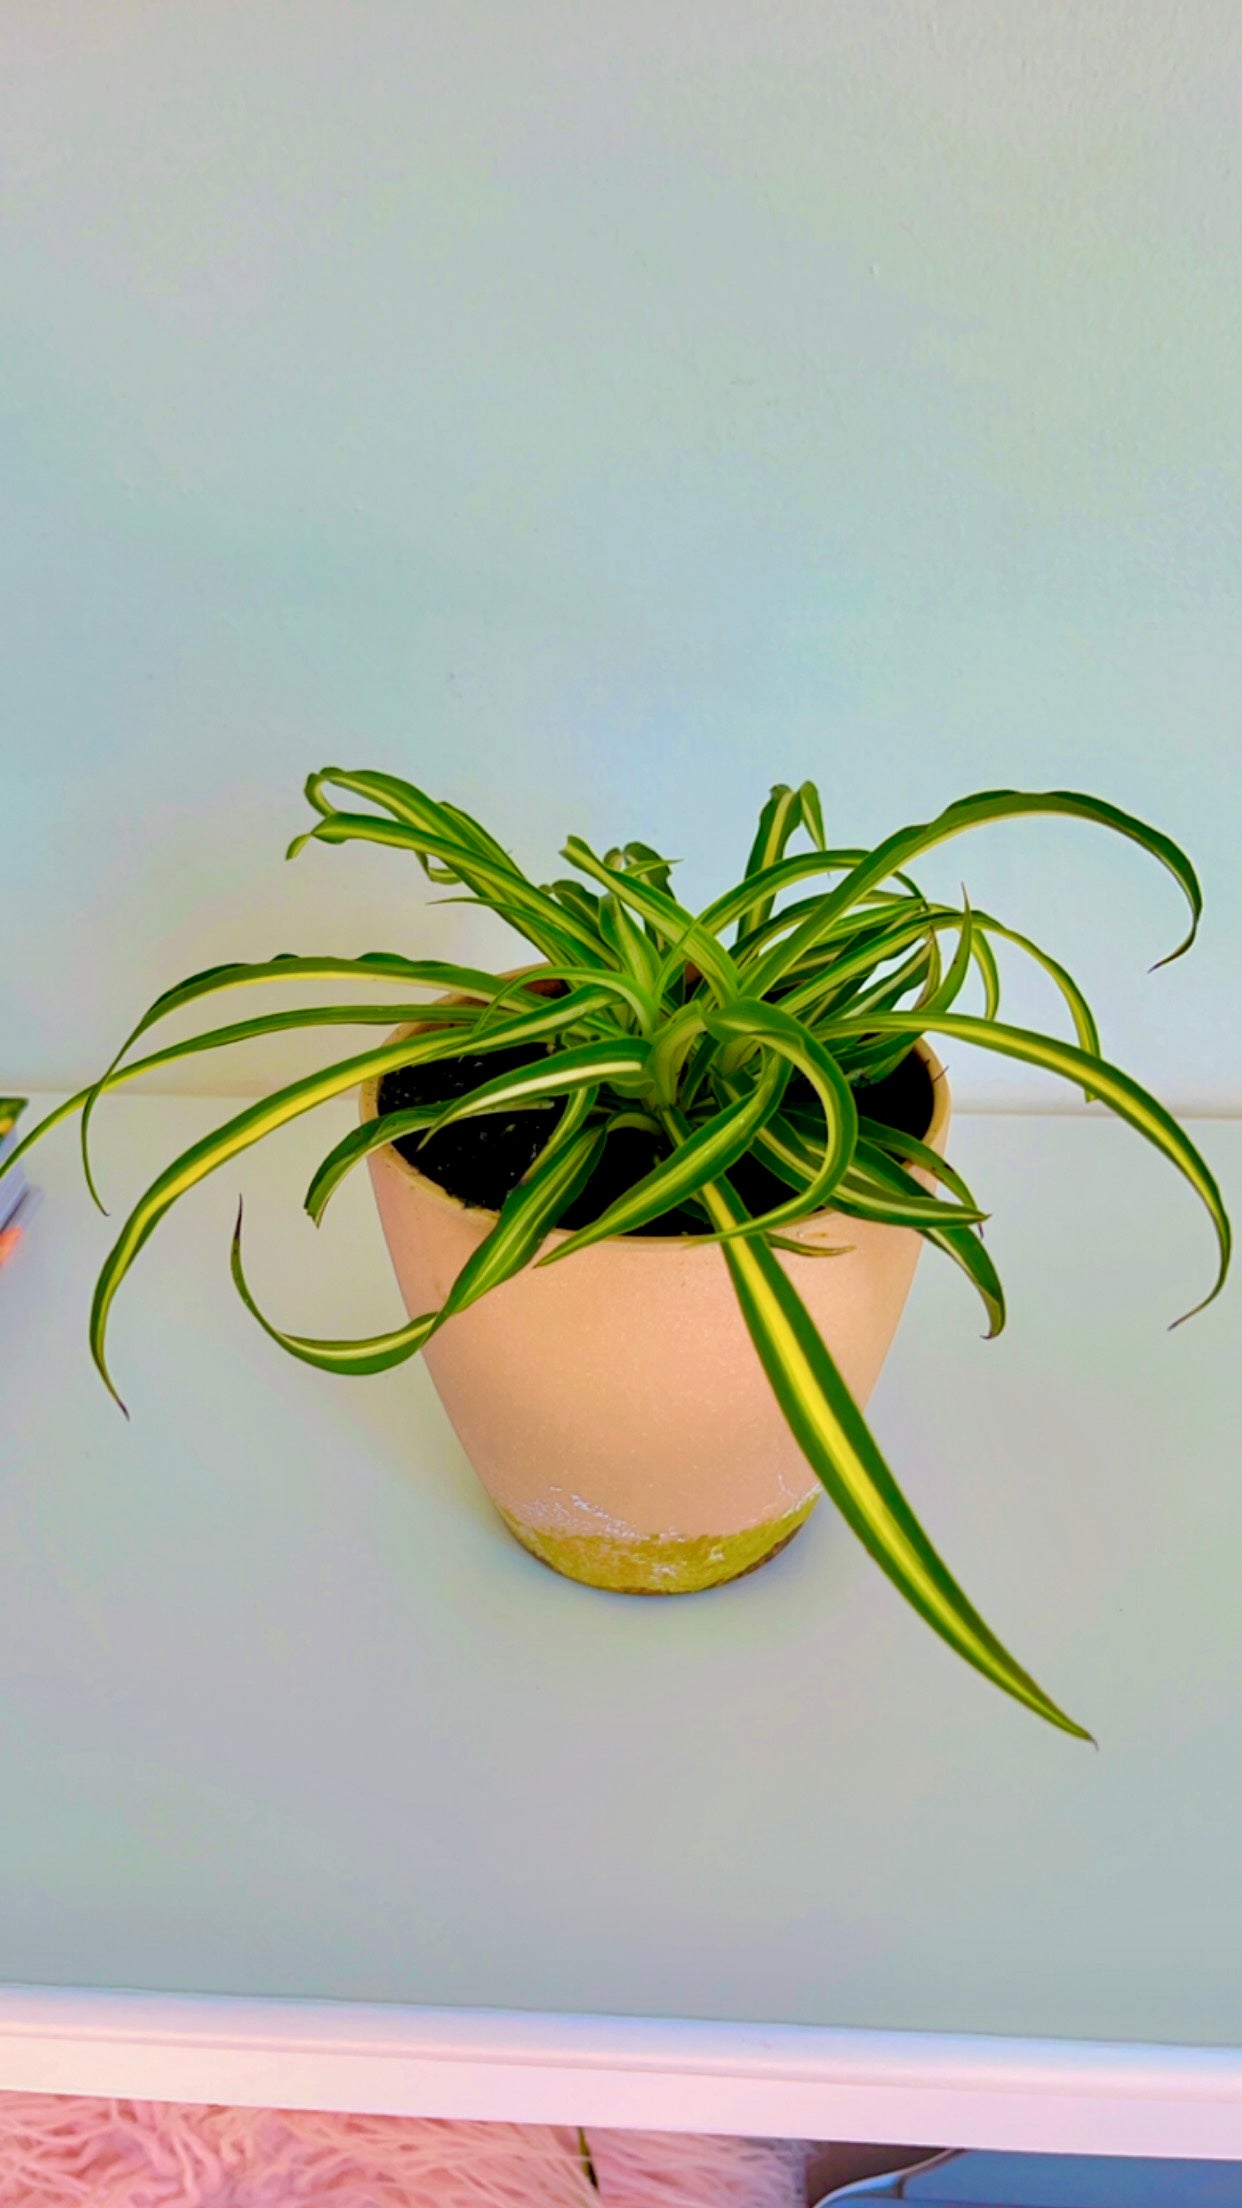 4" Bonnie Curly Spider Plant